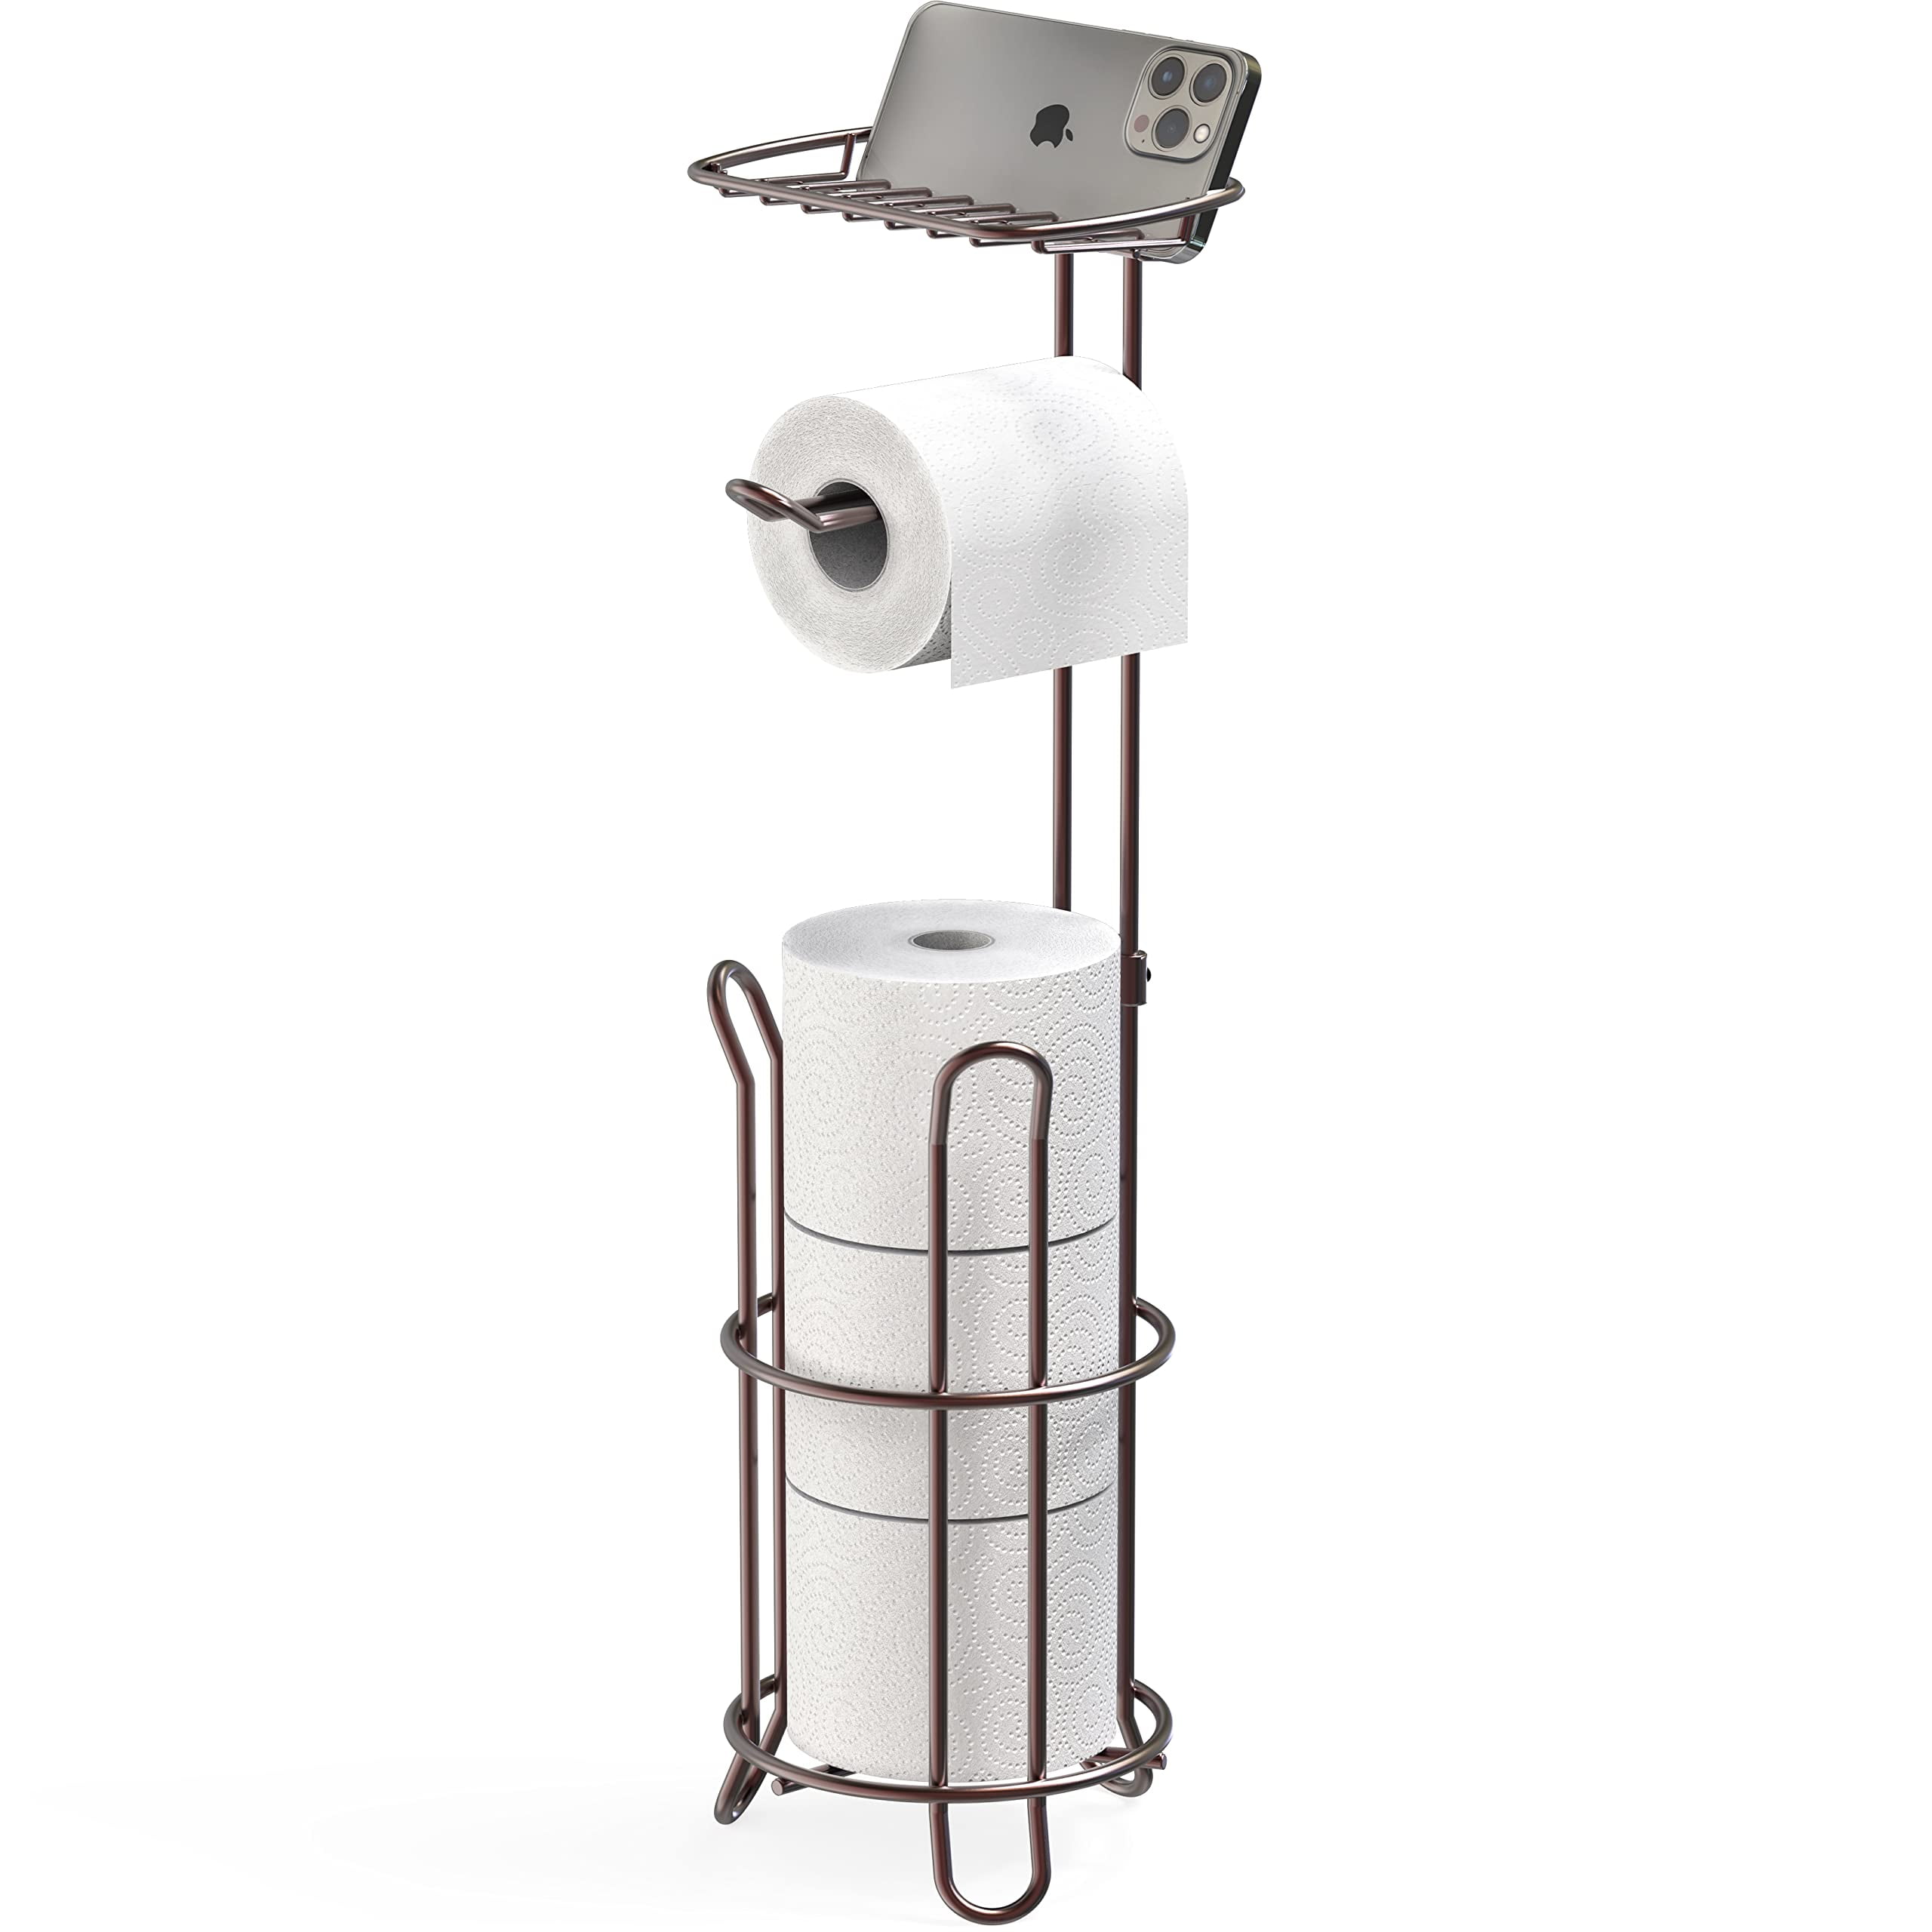 SunnyPoint Bathroom Free Standing Toilet Tissue Paper Roll Holder Stand with Reserve Function, Satin Nickel